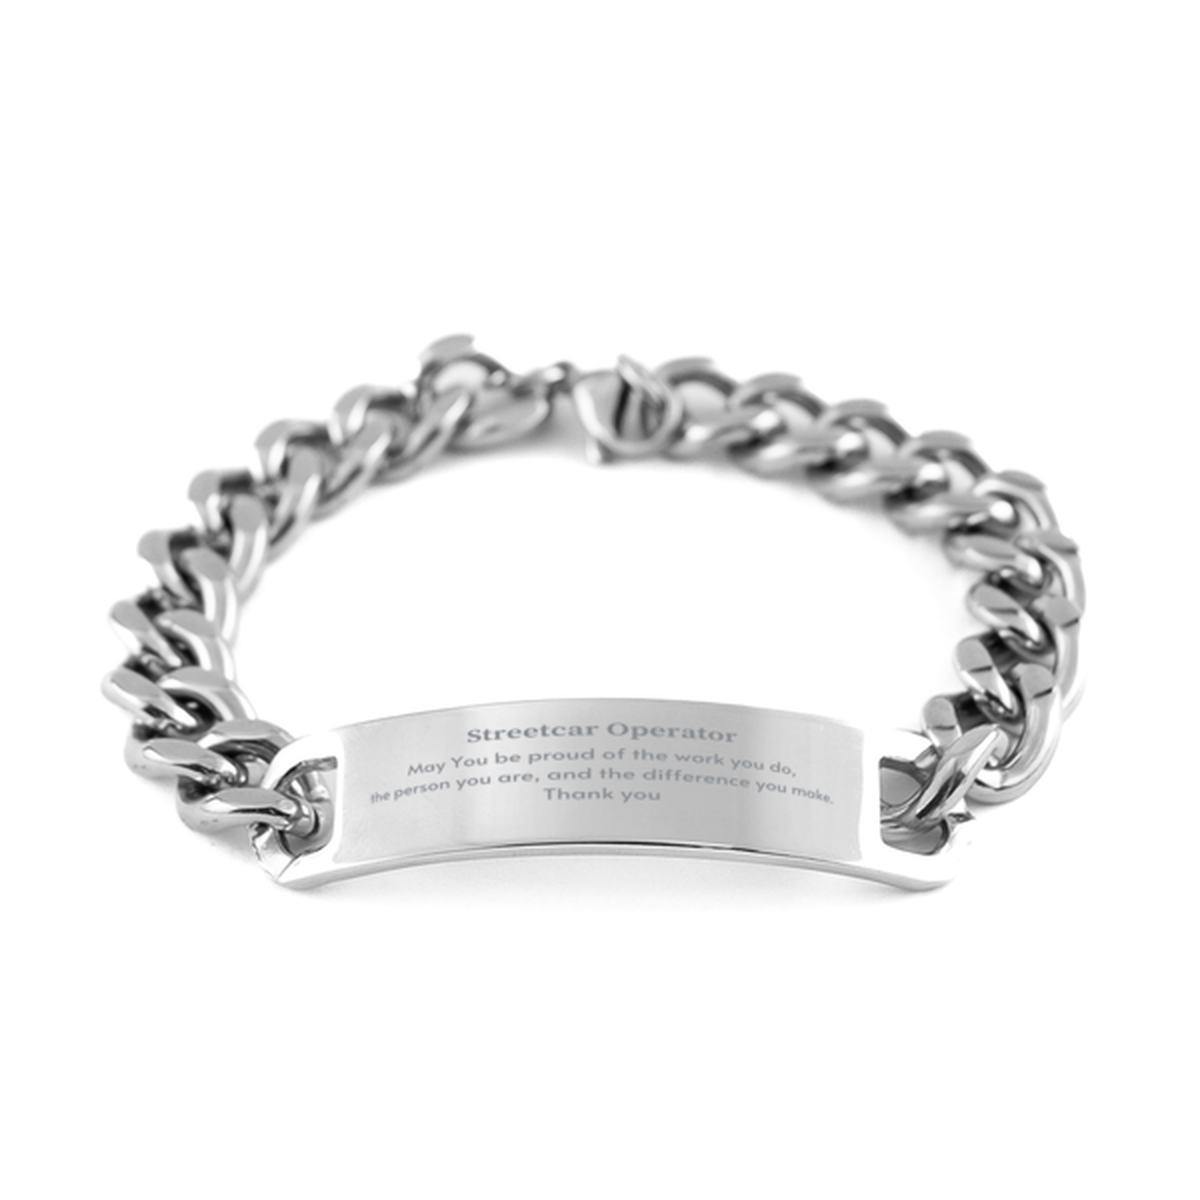 Heartwarming Cuban Chain Stainless Steel Bracelet Retirement Coworkers Gifts for Streetcar Operator, Streetcar Operator May You be proud of the work you do, the person you are Gifts for Boss Men Women Friends